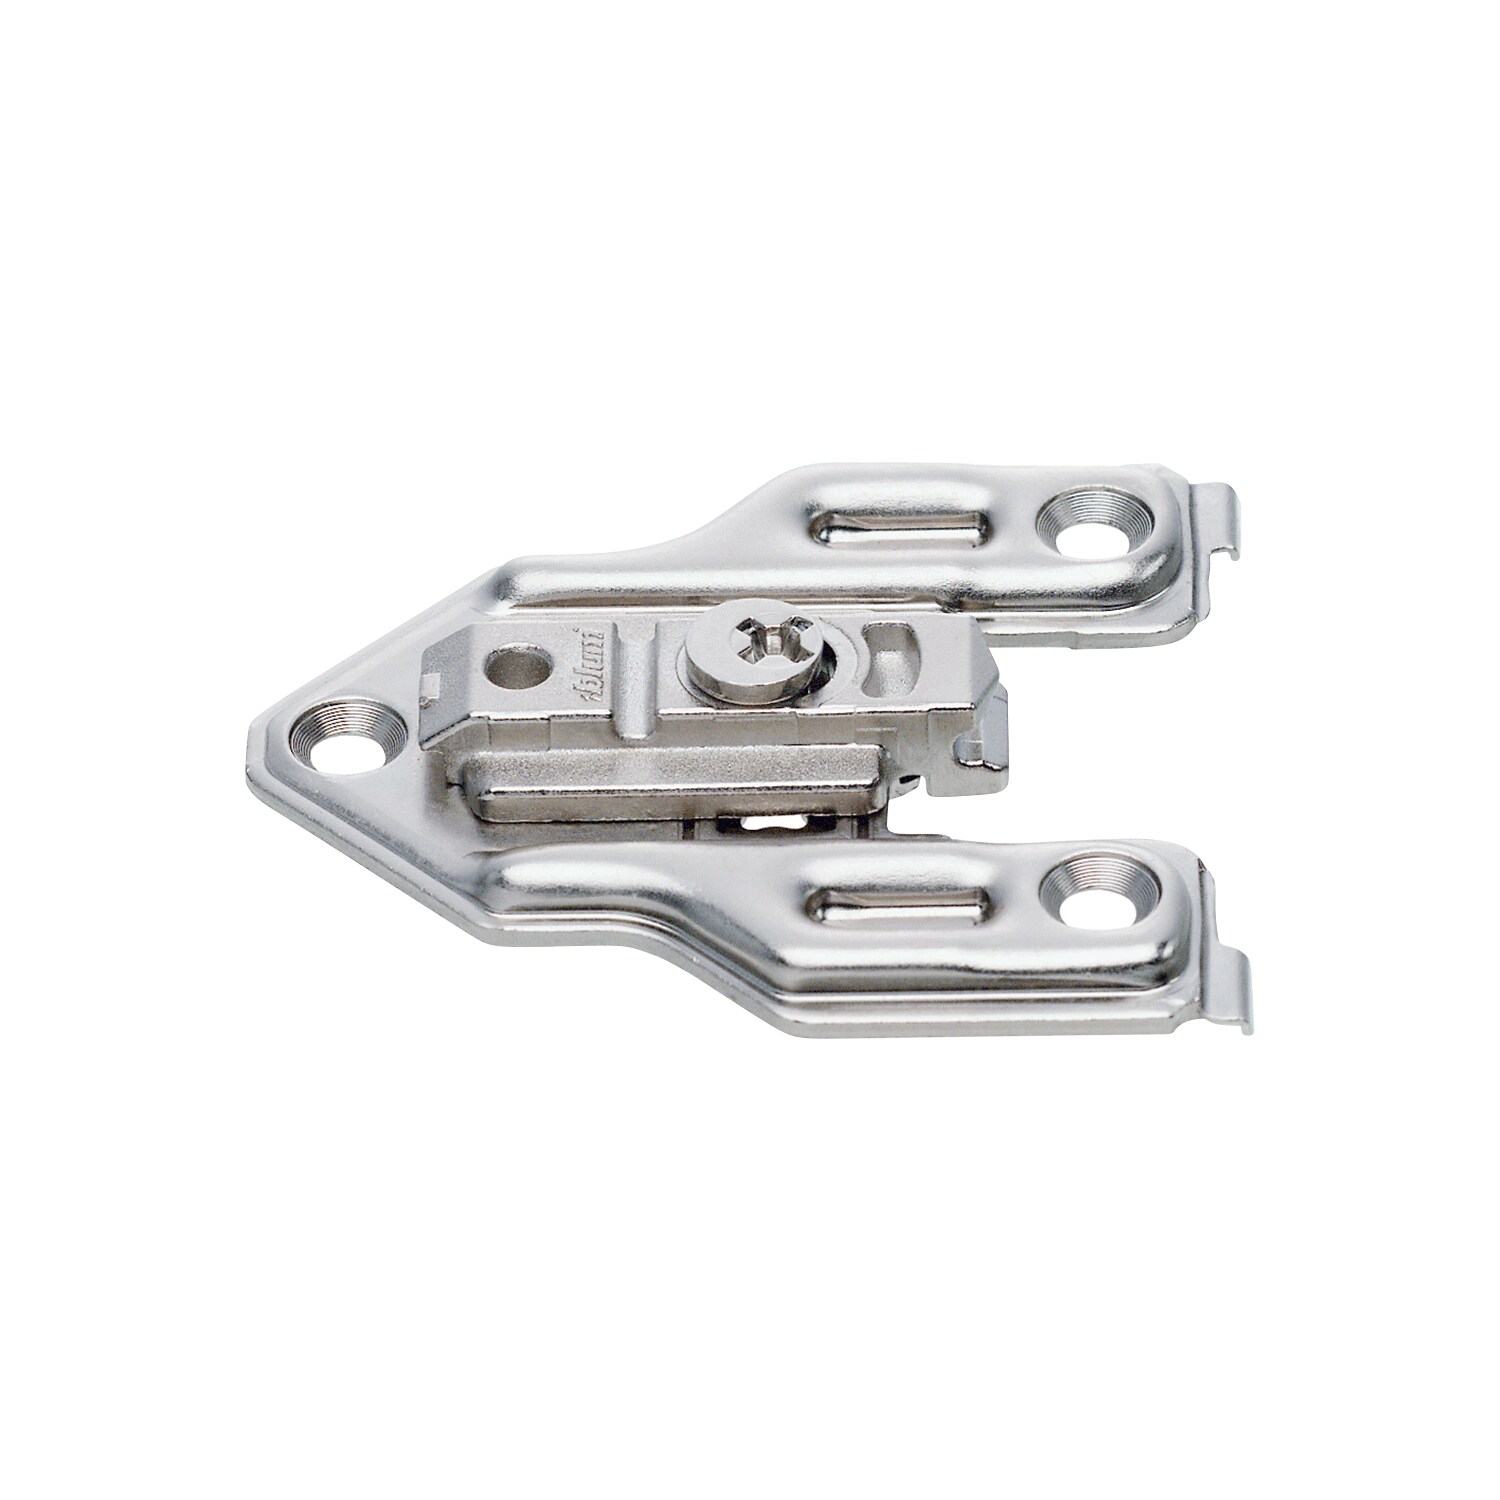 Blum 10-Pack Clip Face Frame Screw-on 0mm Mounting Plate, Nickel Plated - image 3 of 3